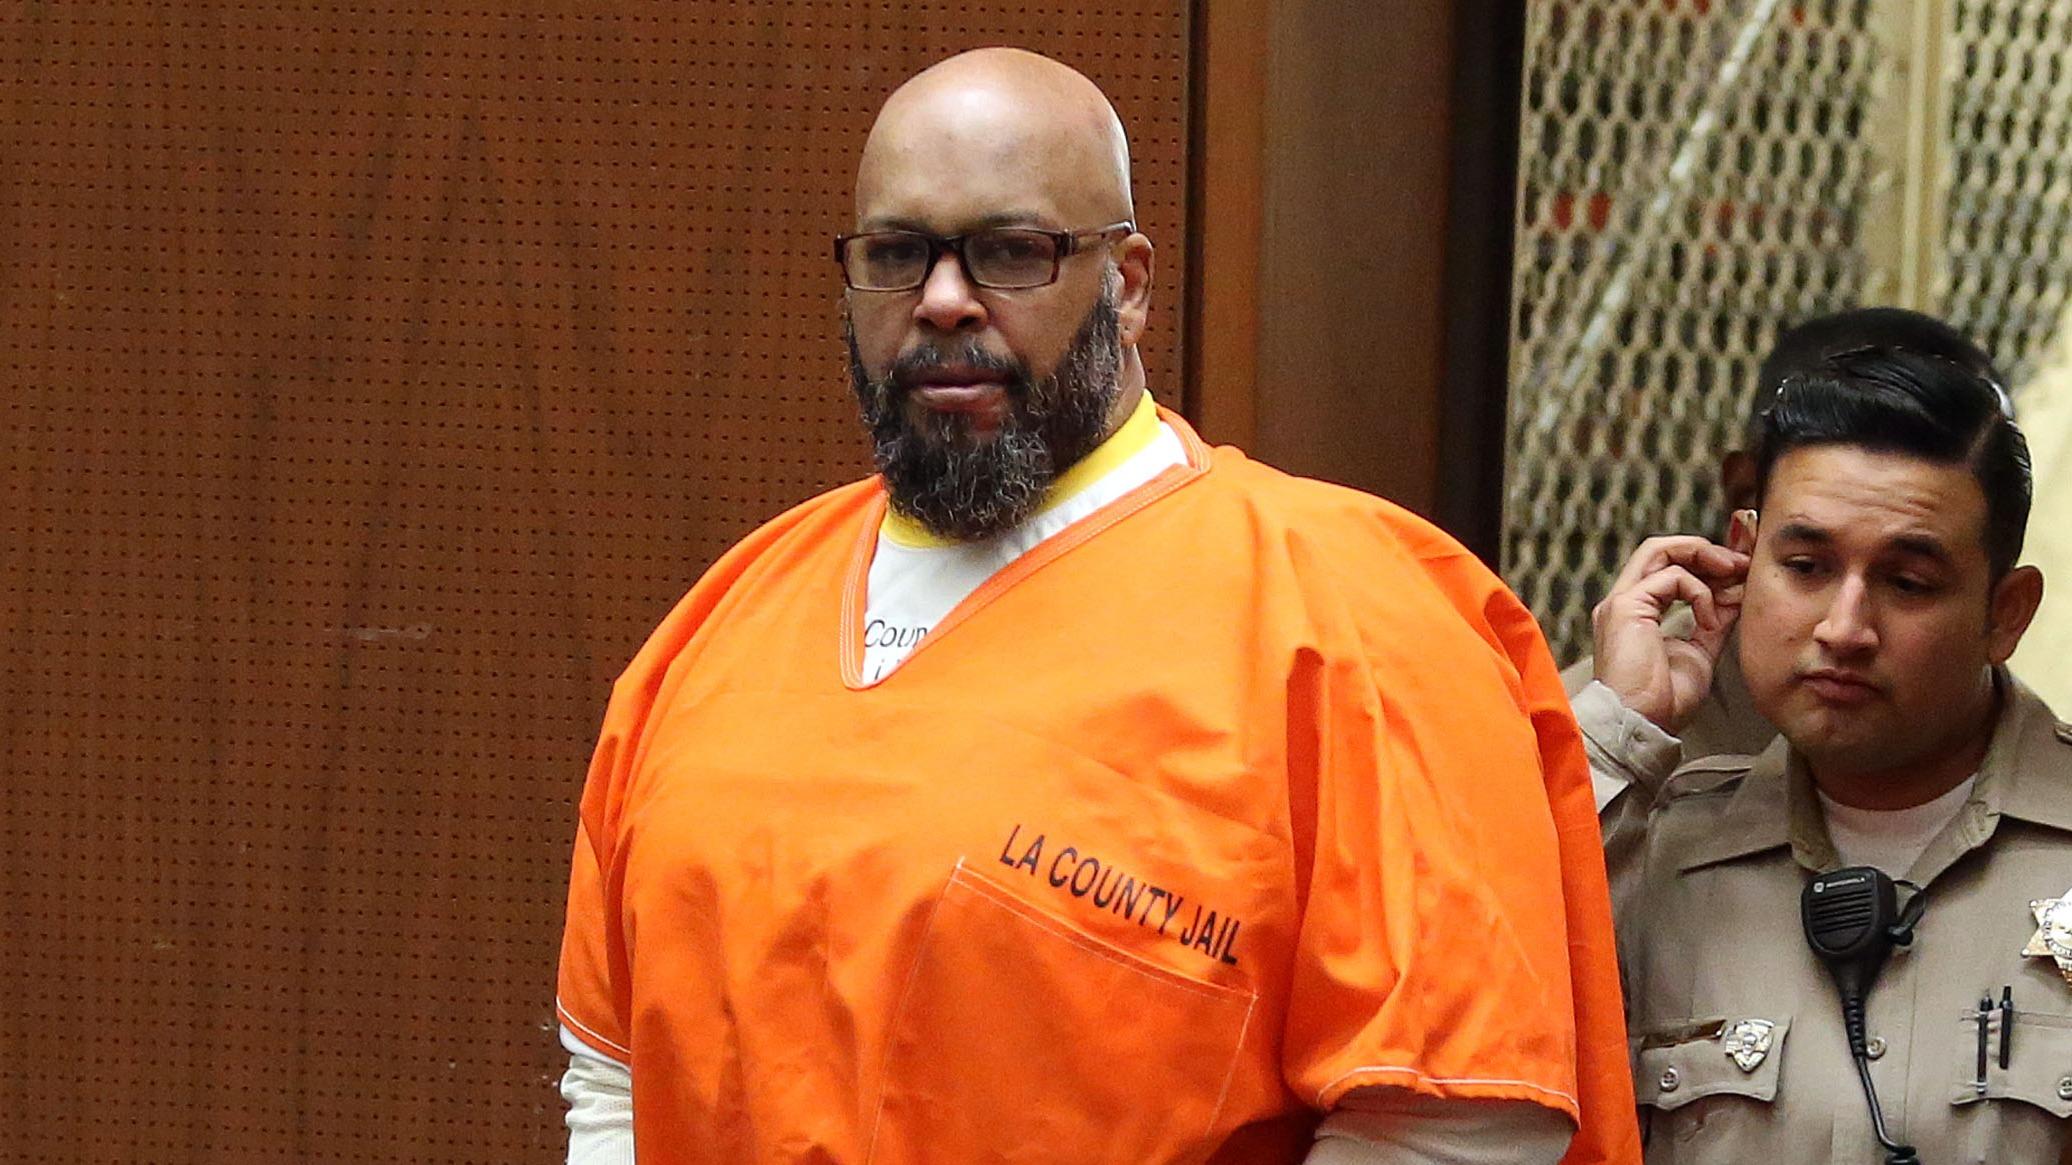 Suge Knight Sets the Record Straight from Behind Bars: Fiancée Owns Life Rights